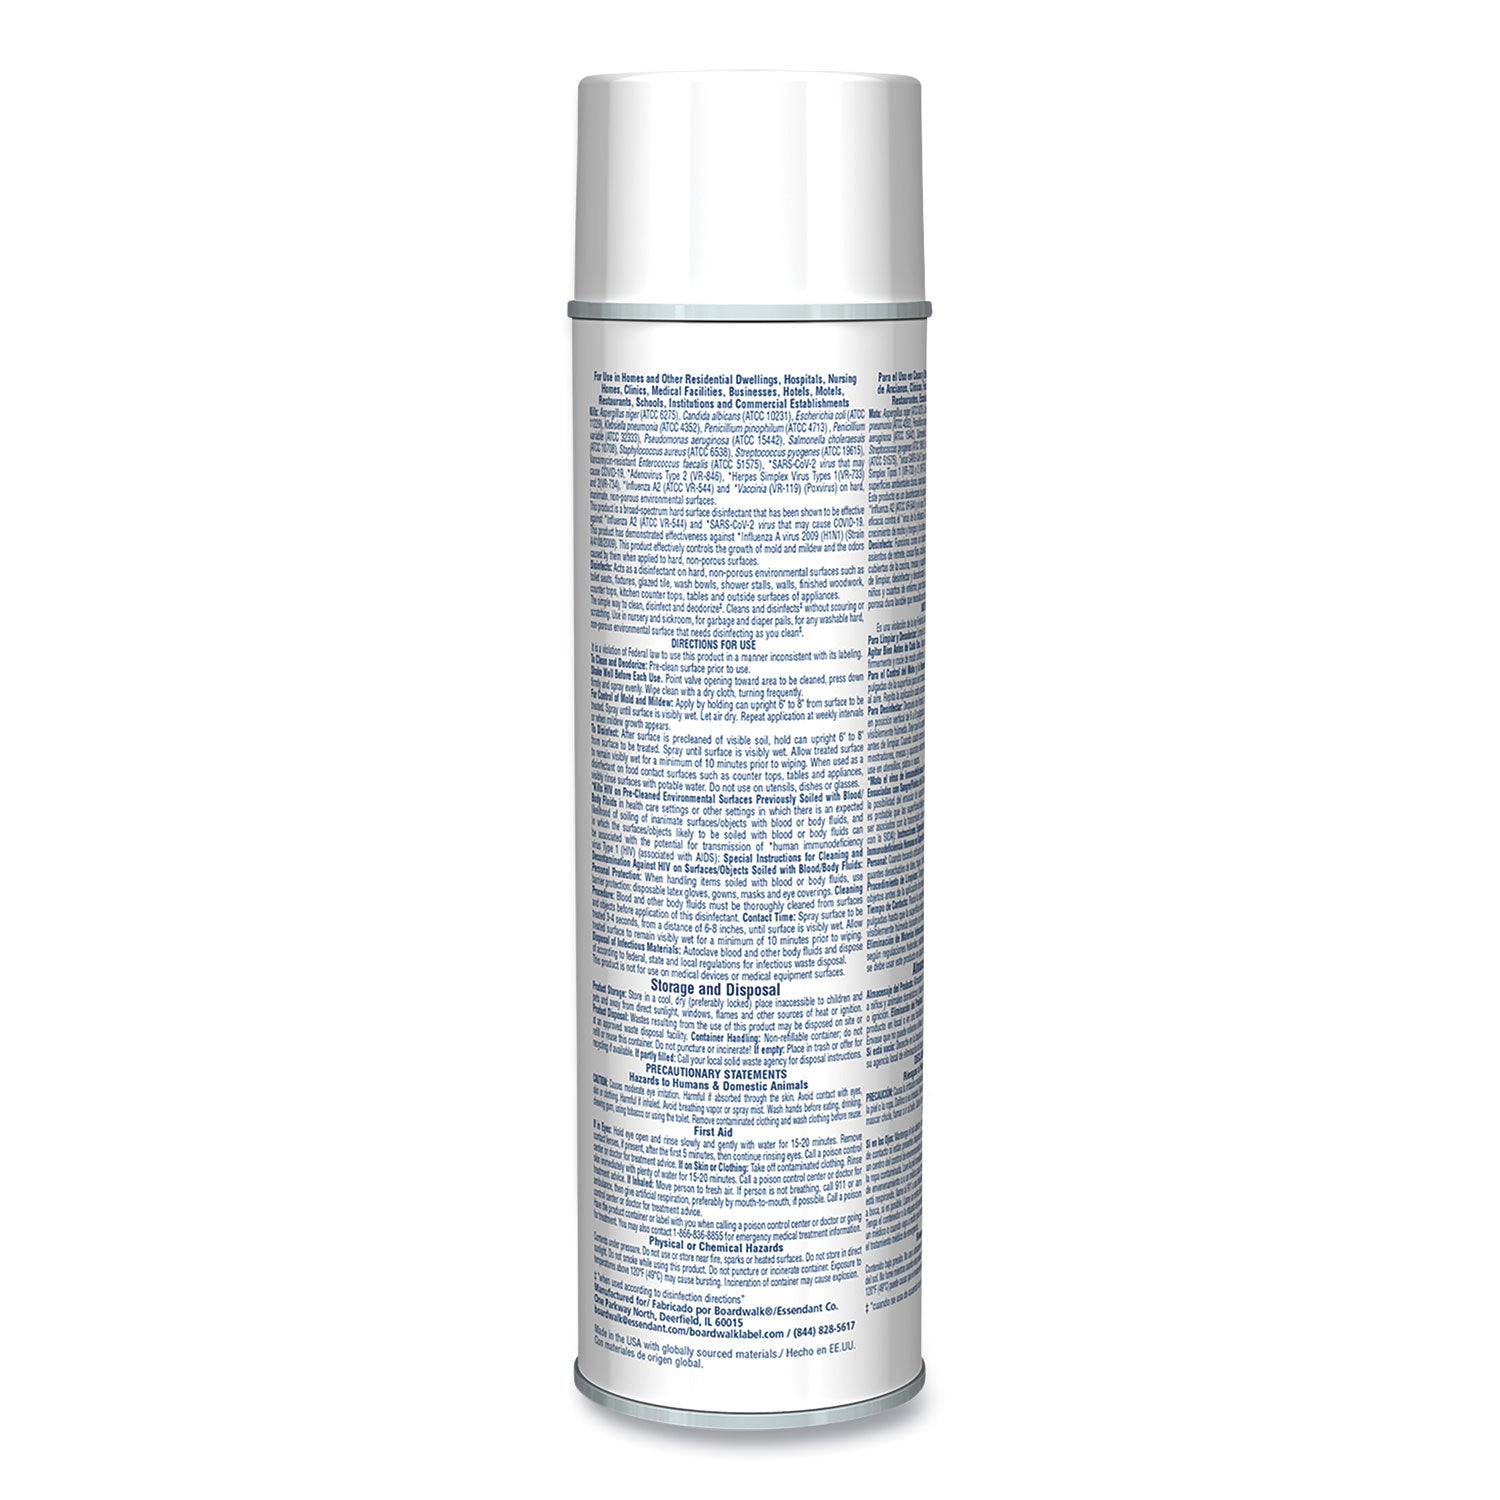 foaming-disinfectant-germicidal-cleaner-flowery-scent-19-oz-aerosol-can-12-carton_bwk343act - 4